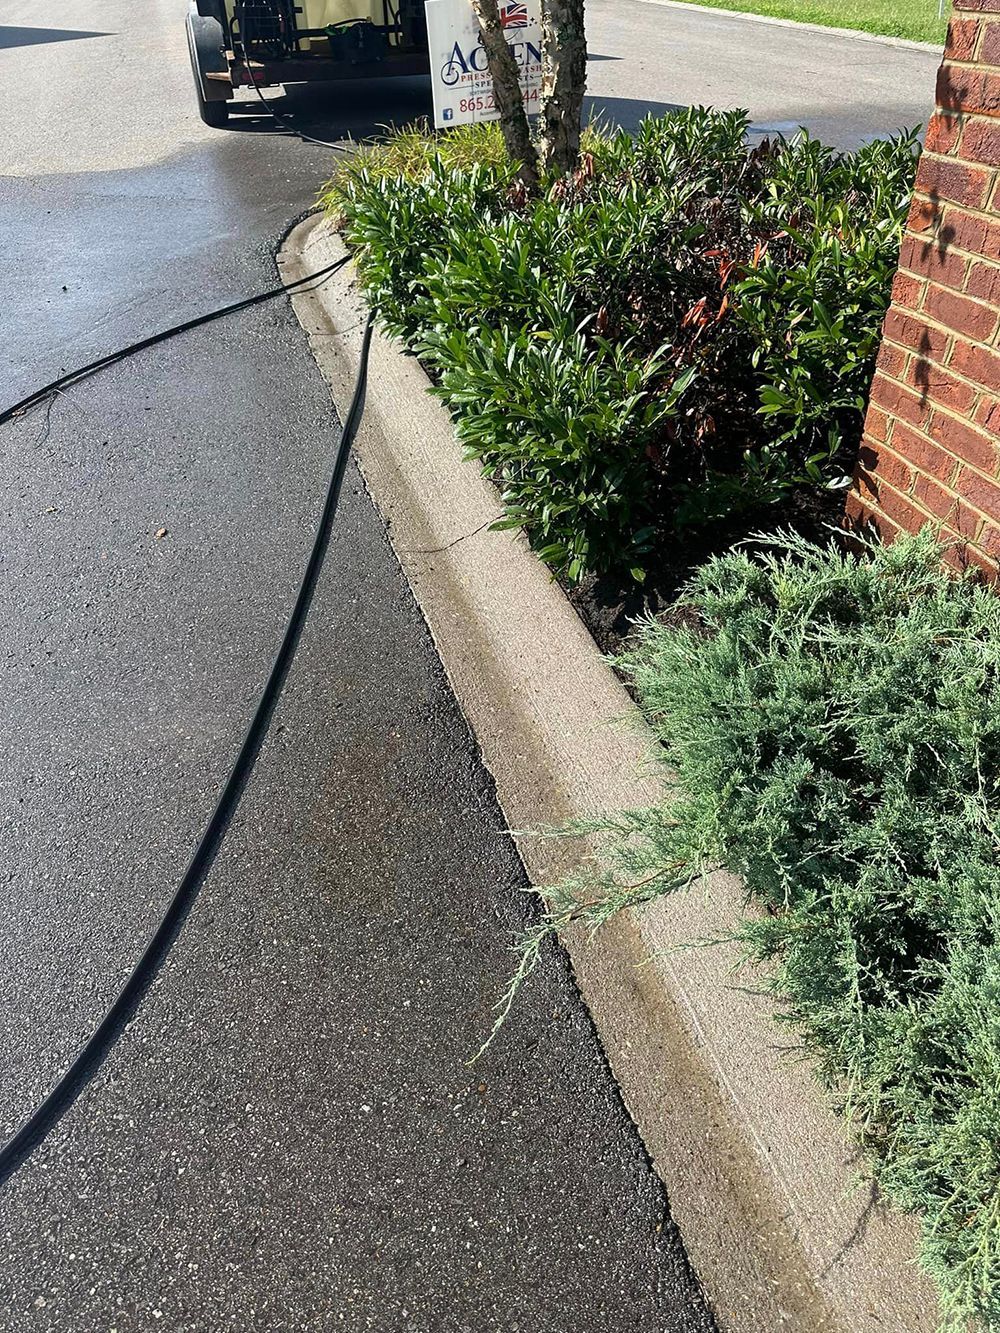 A hose is being used to clean a sidewalk next to a brick building